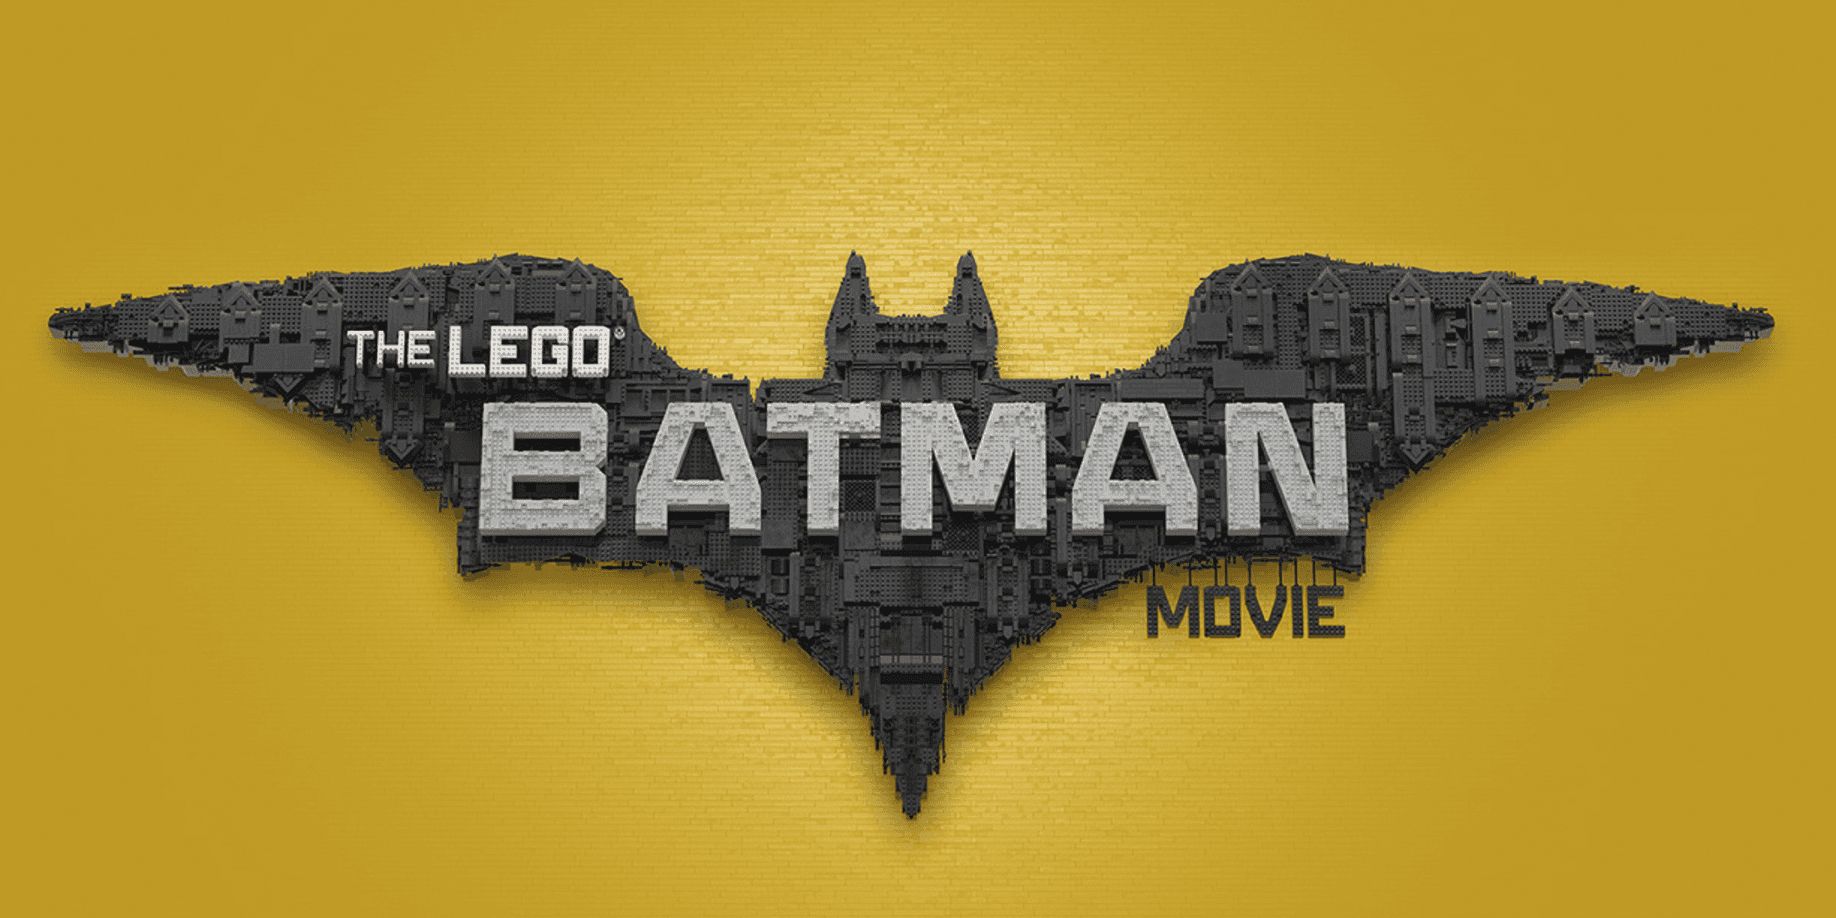 15 Things You Need To Know About The Lego Batman Movie